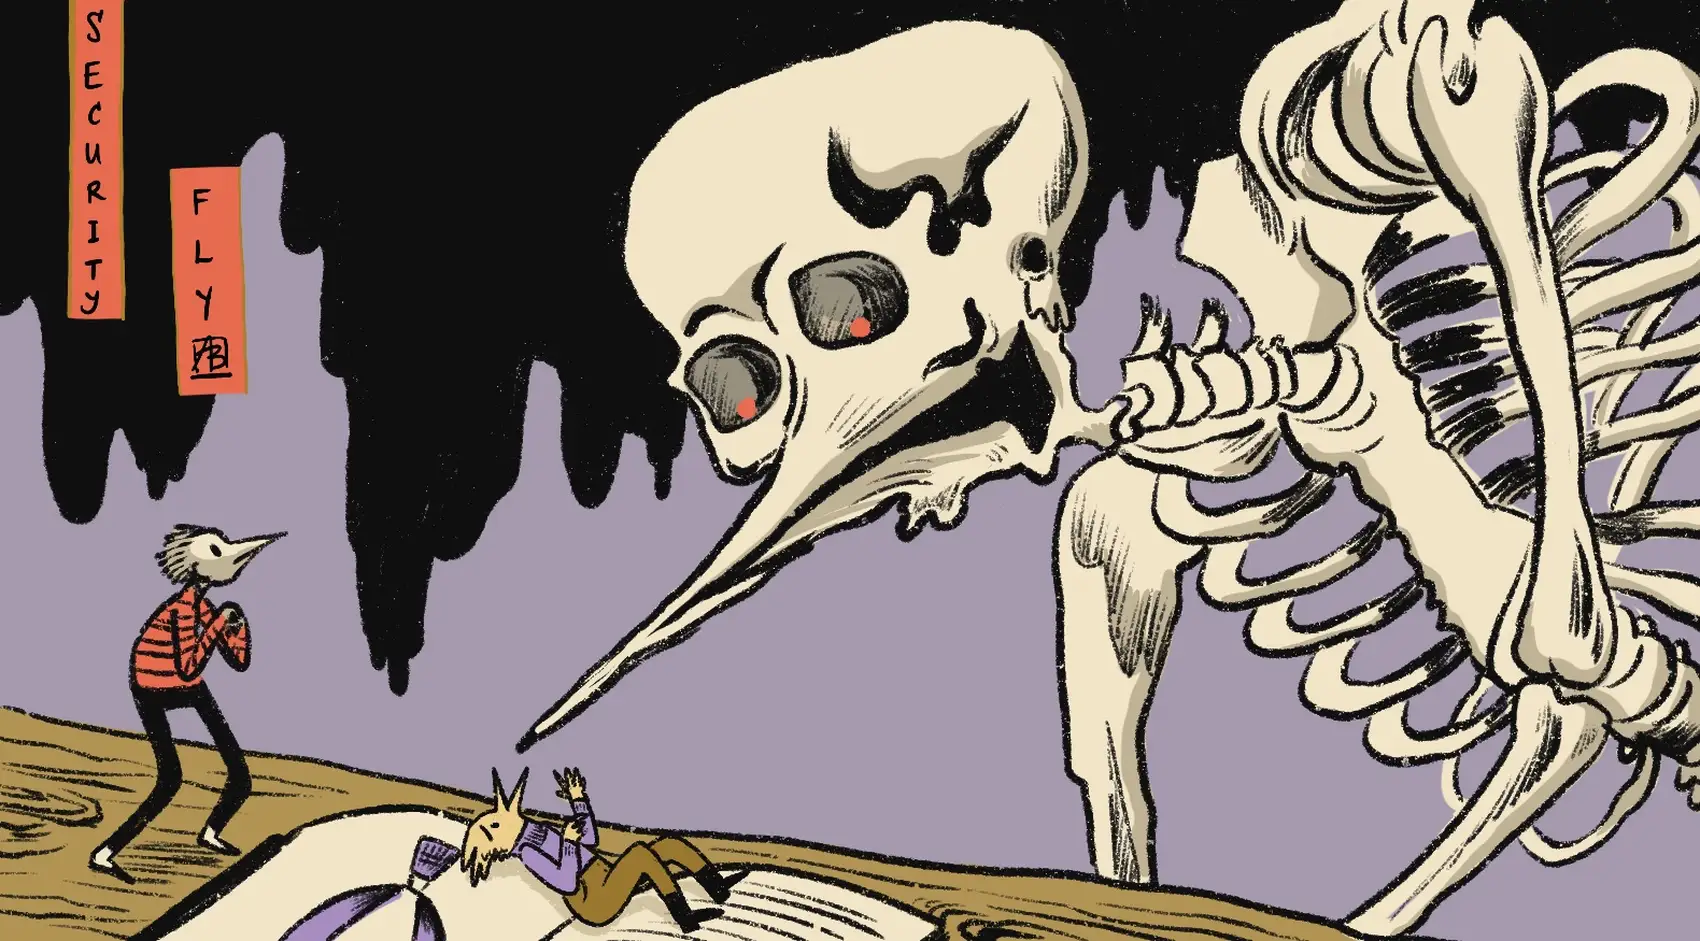 A giant cartoon bird-person skeleton with points of red light in the eye sockets looms menacingly over a much smaller living bird-person who's fallen backward onto a giant book.